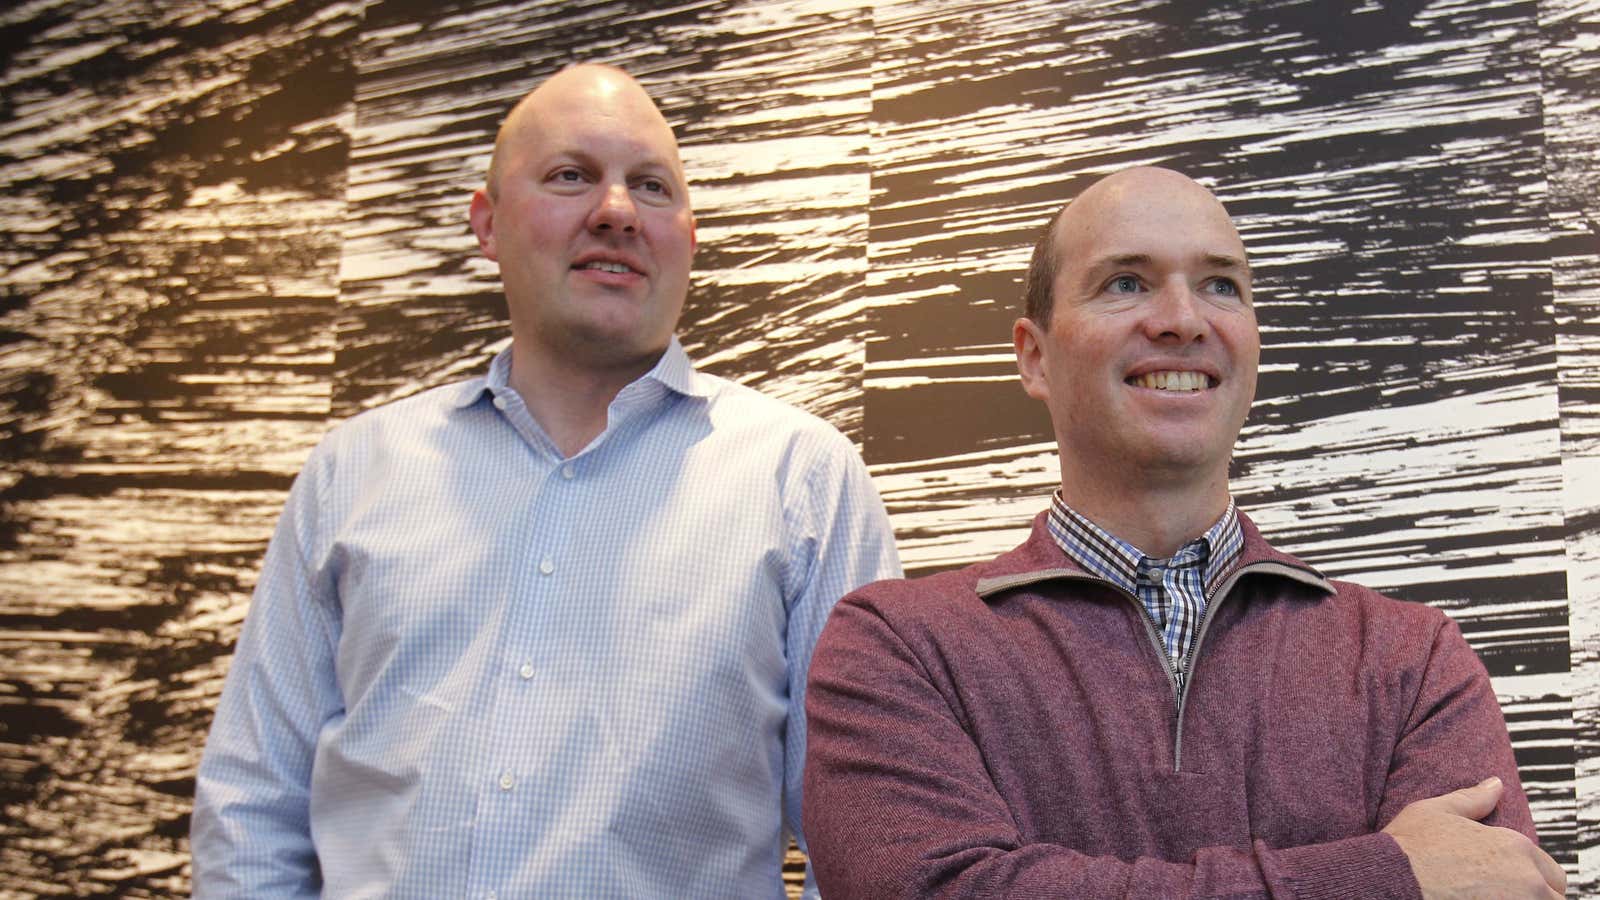 venture capitalist and Netscape co-founder Marc Andreessen, left, and his longtime business partner, Ben Horowitz, pose in their office in Menlo Park, California.